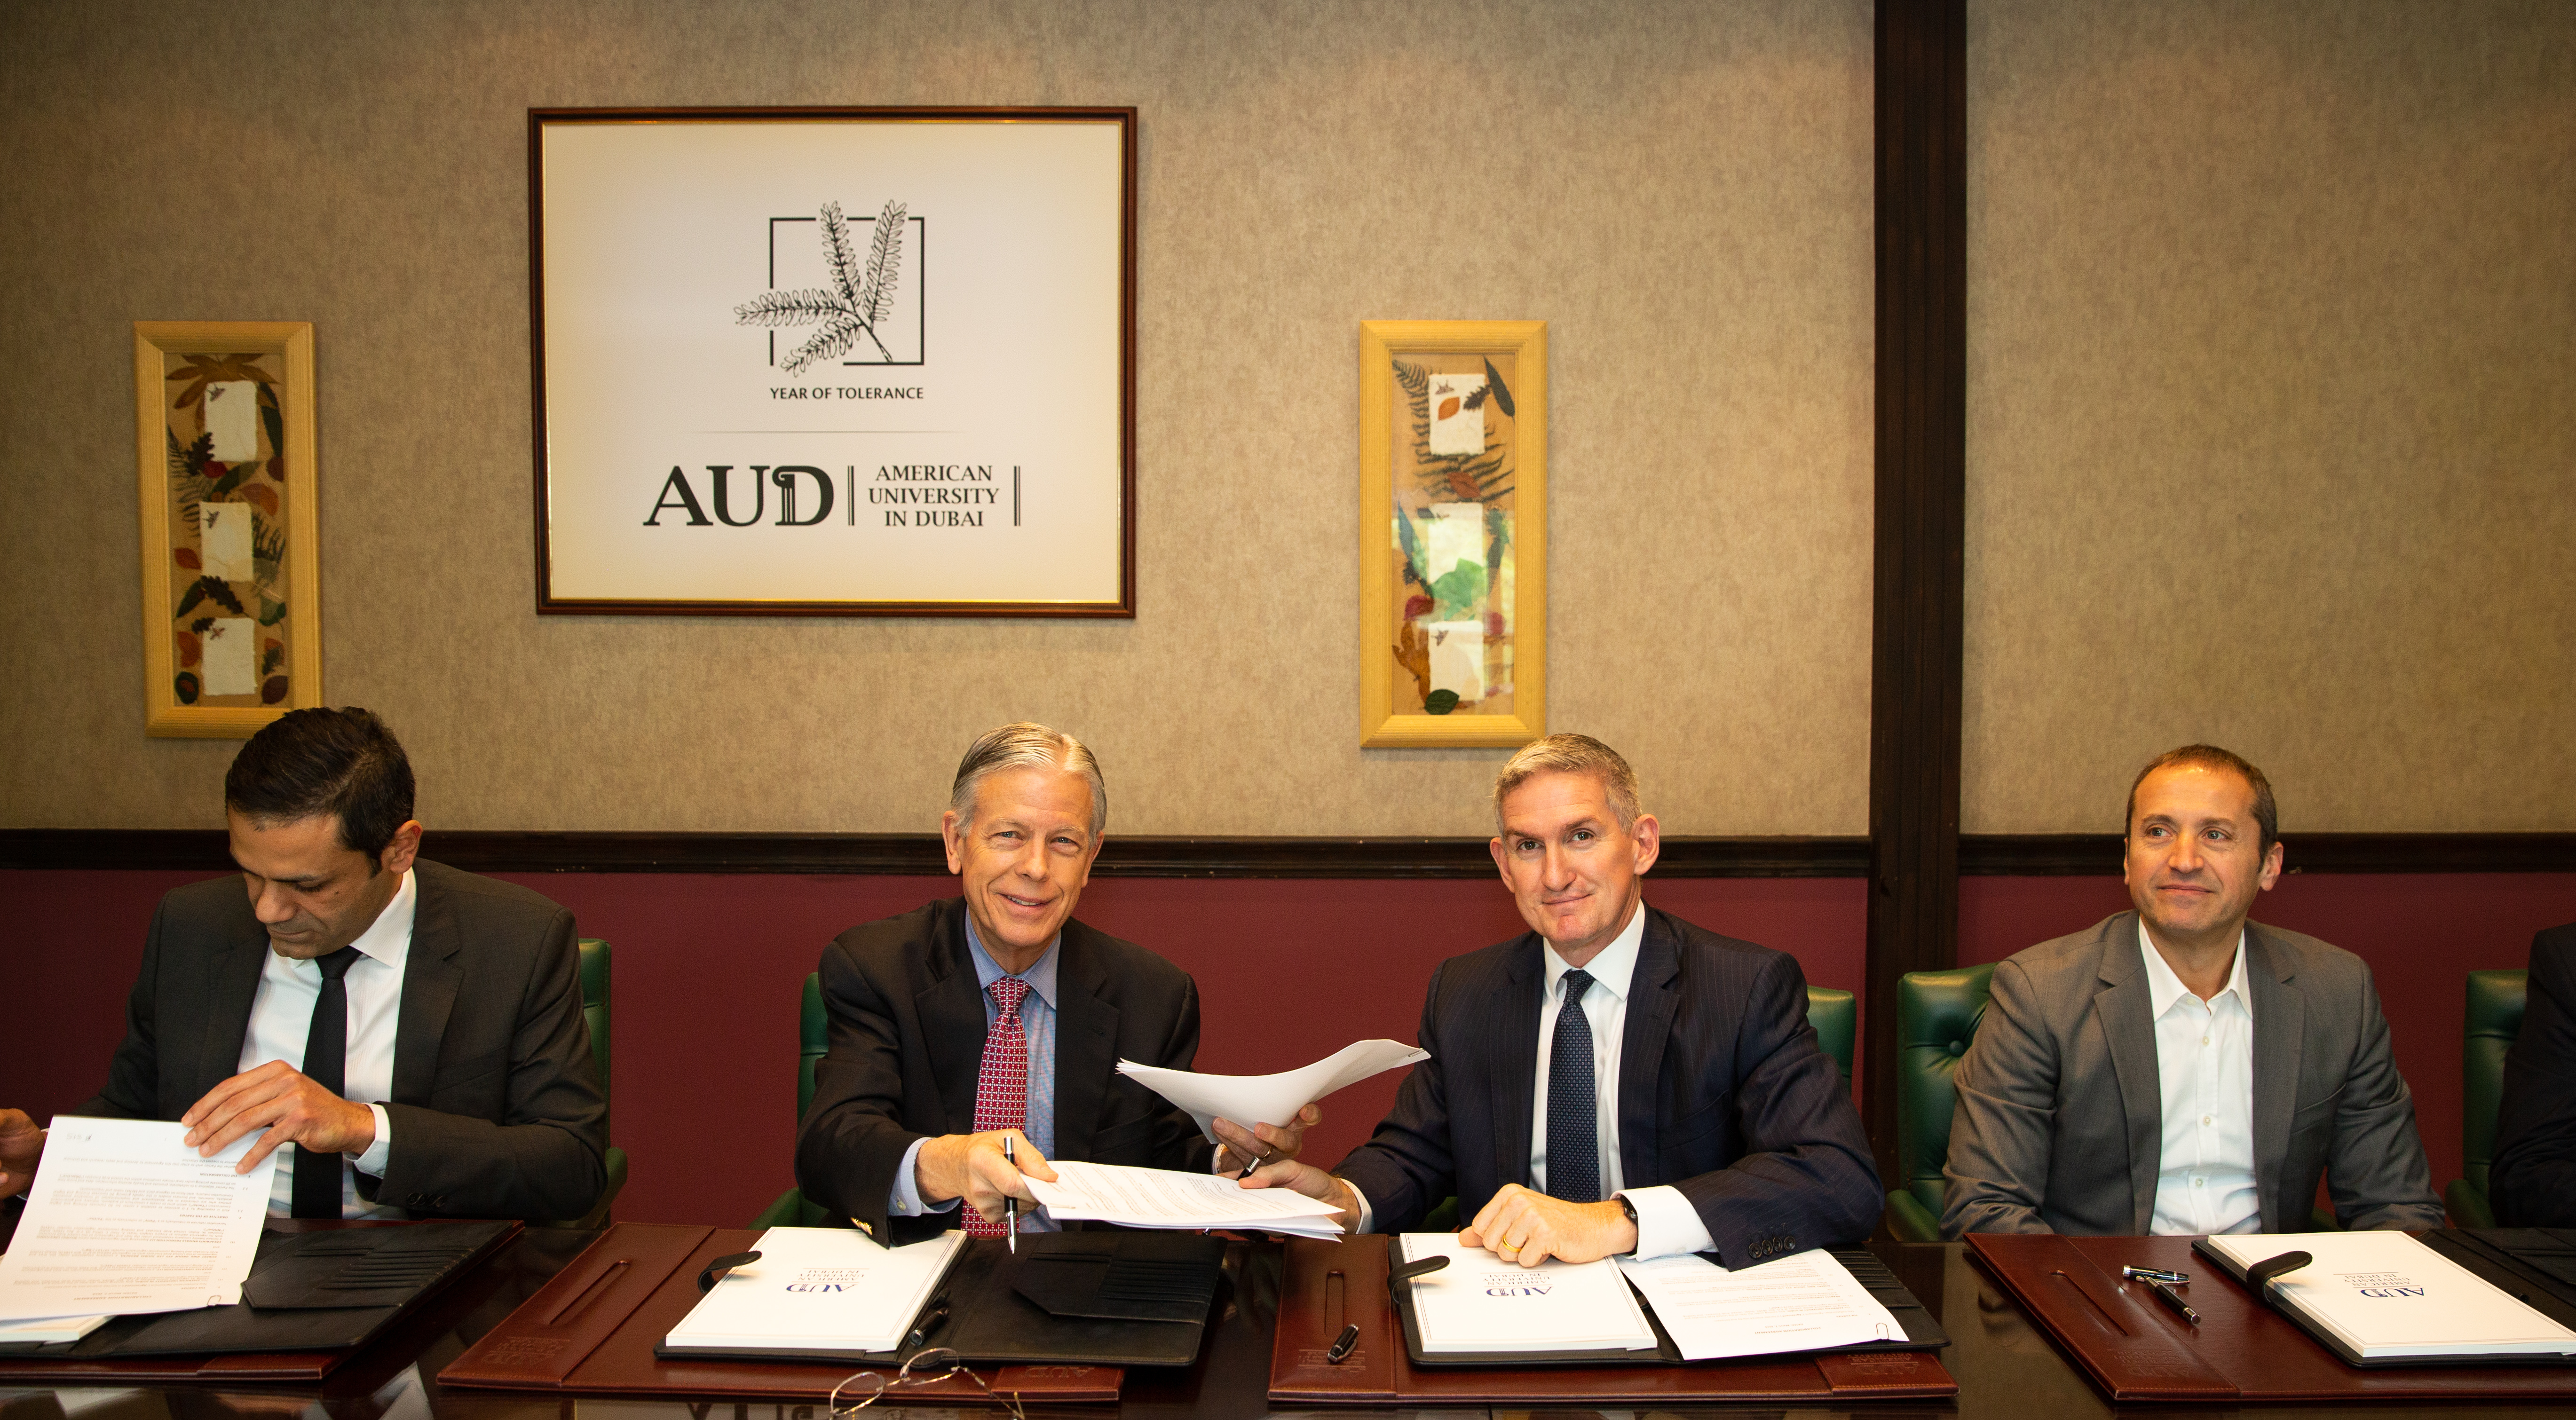 AUD signed a cooperation agreement with Arabtec Construction Company, 3DVinci Creations and Robert Bird Group. Photo via 3DVinci Creations.